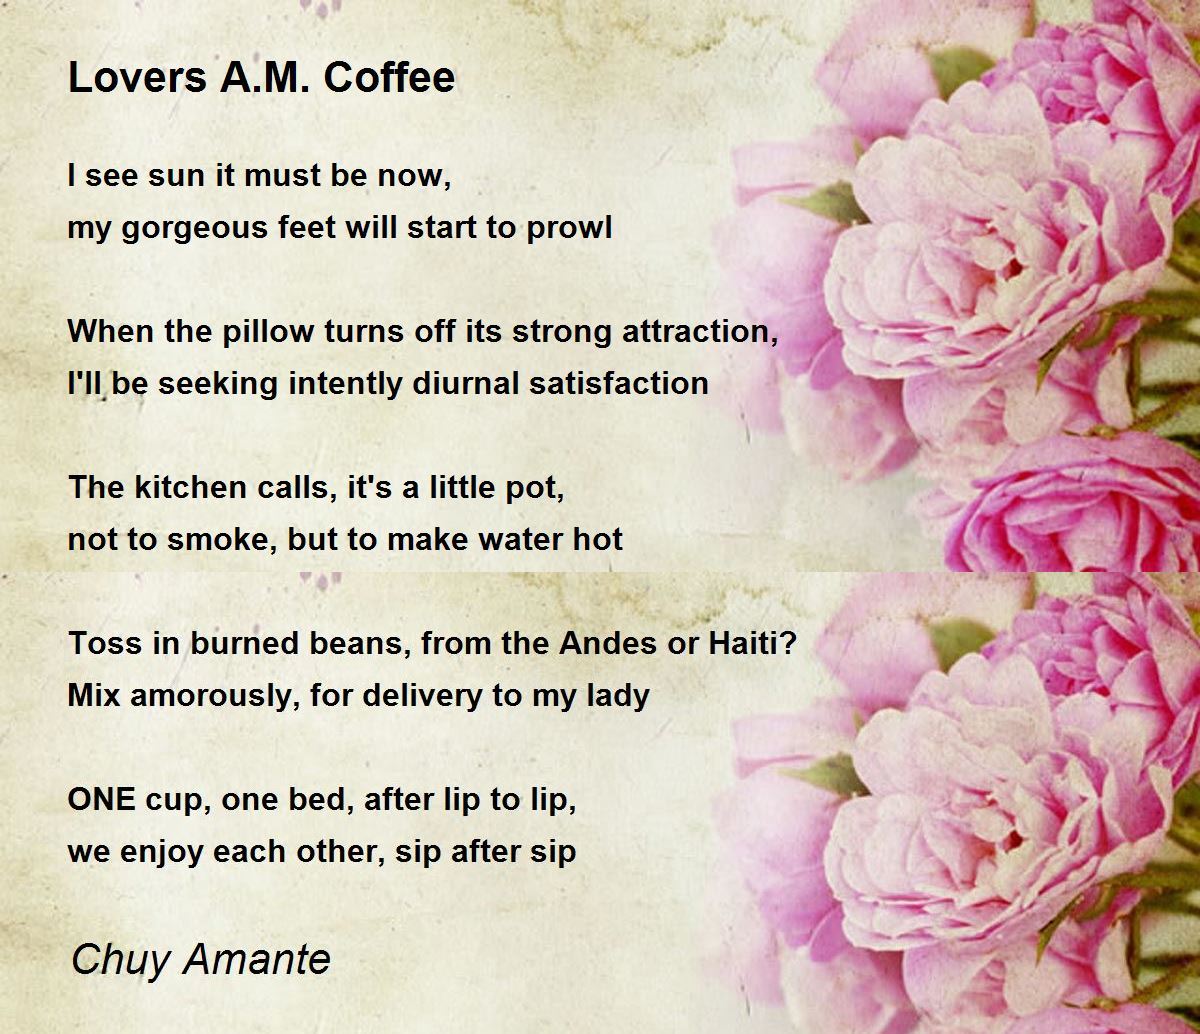 https://img.poemhunter.com/i/poem_images/929/lovers-a-m-coffee.jpg